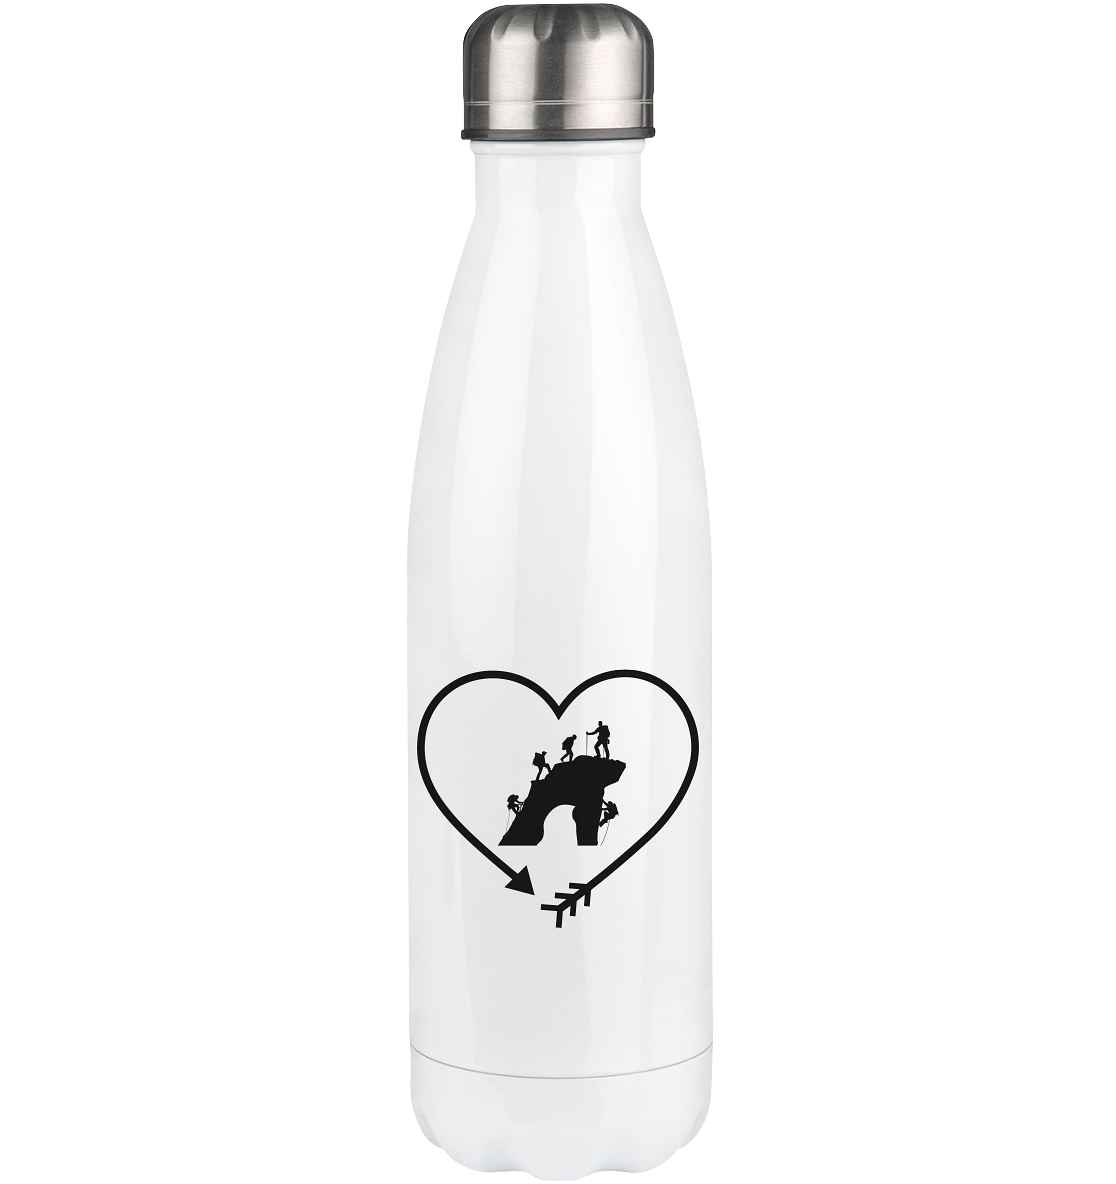 Arrow in Heartshape and Climbing - Edelstahl Thermosflasche klettern 500ml